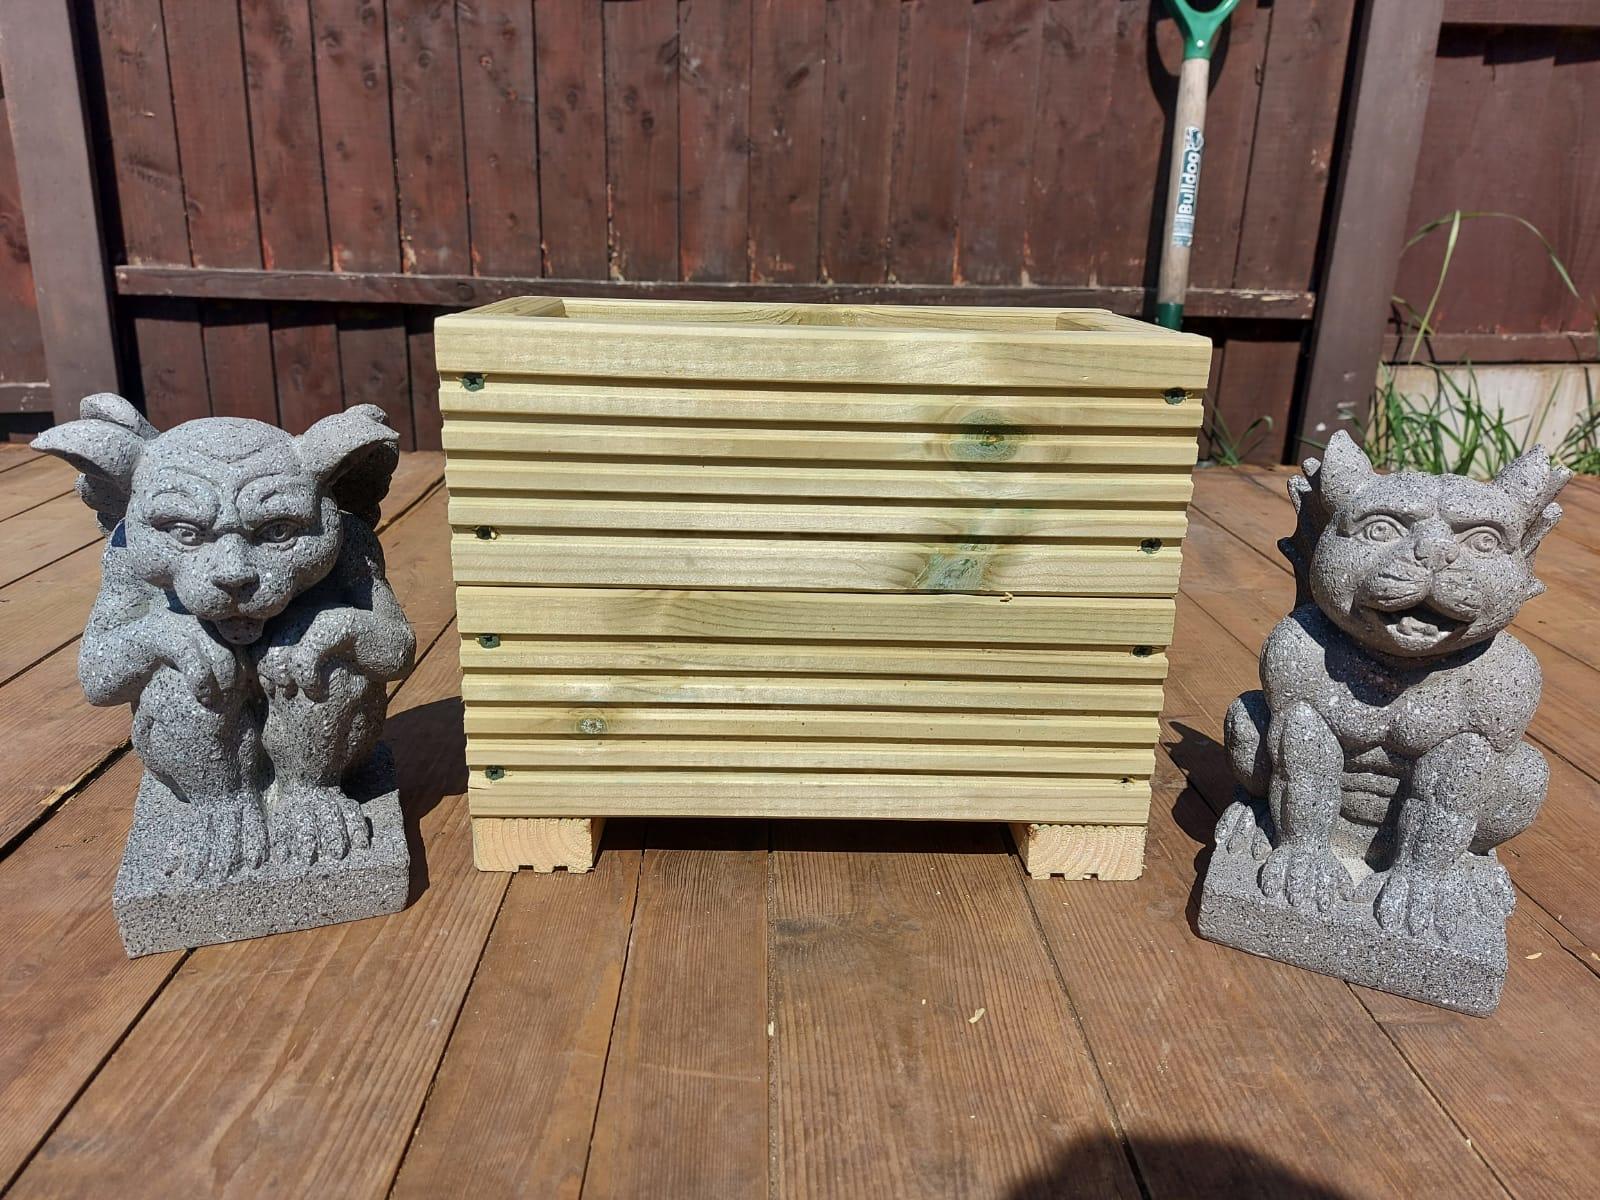 decking planter on wood deck base with statues each side of the planter